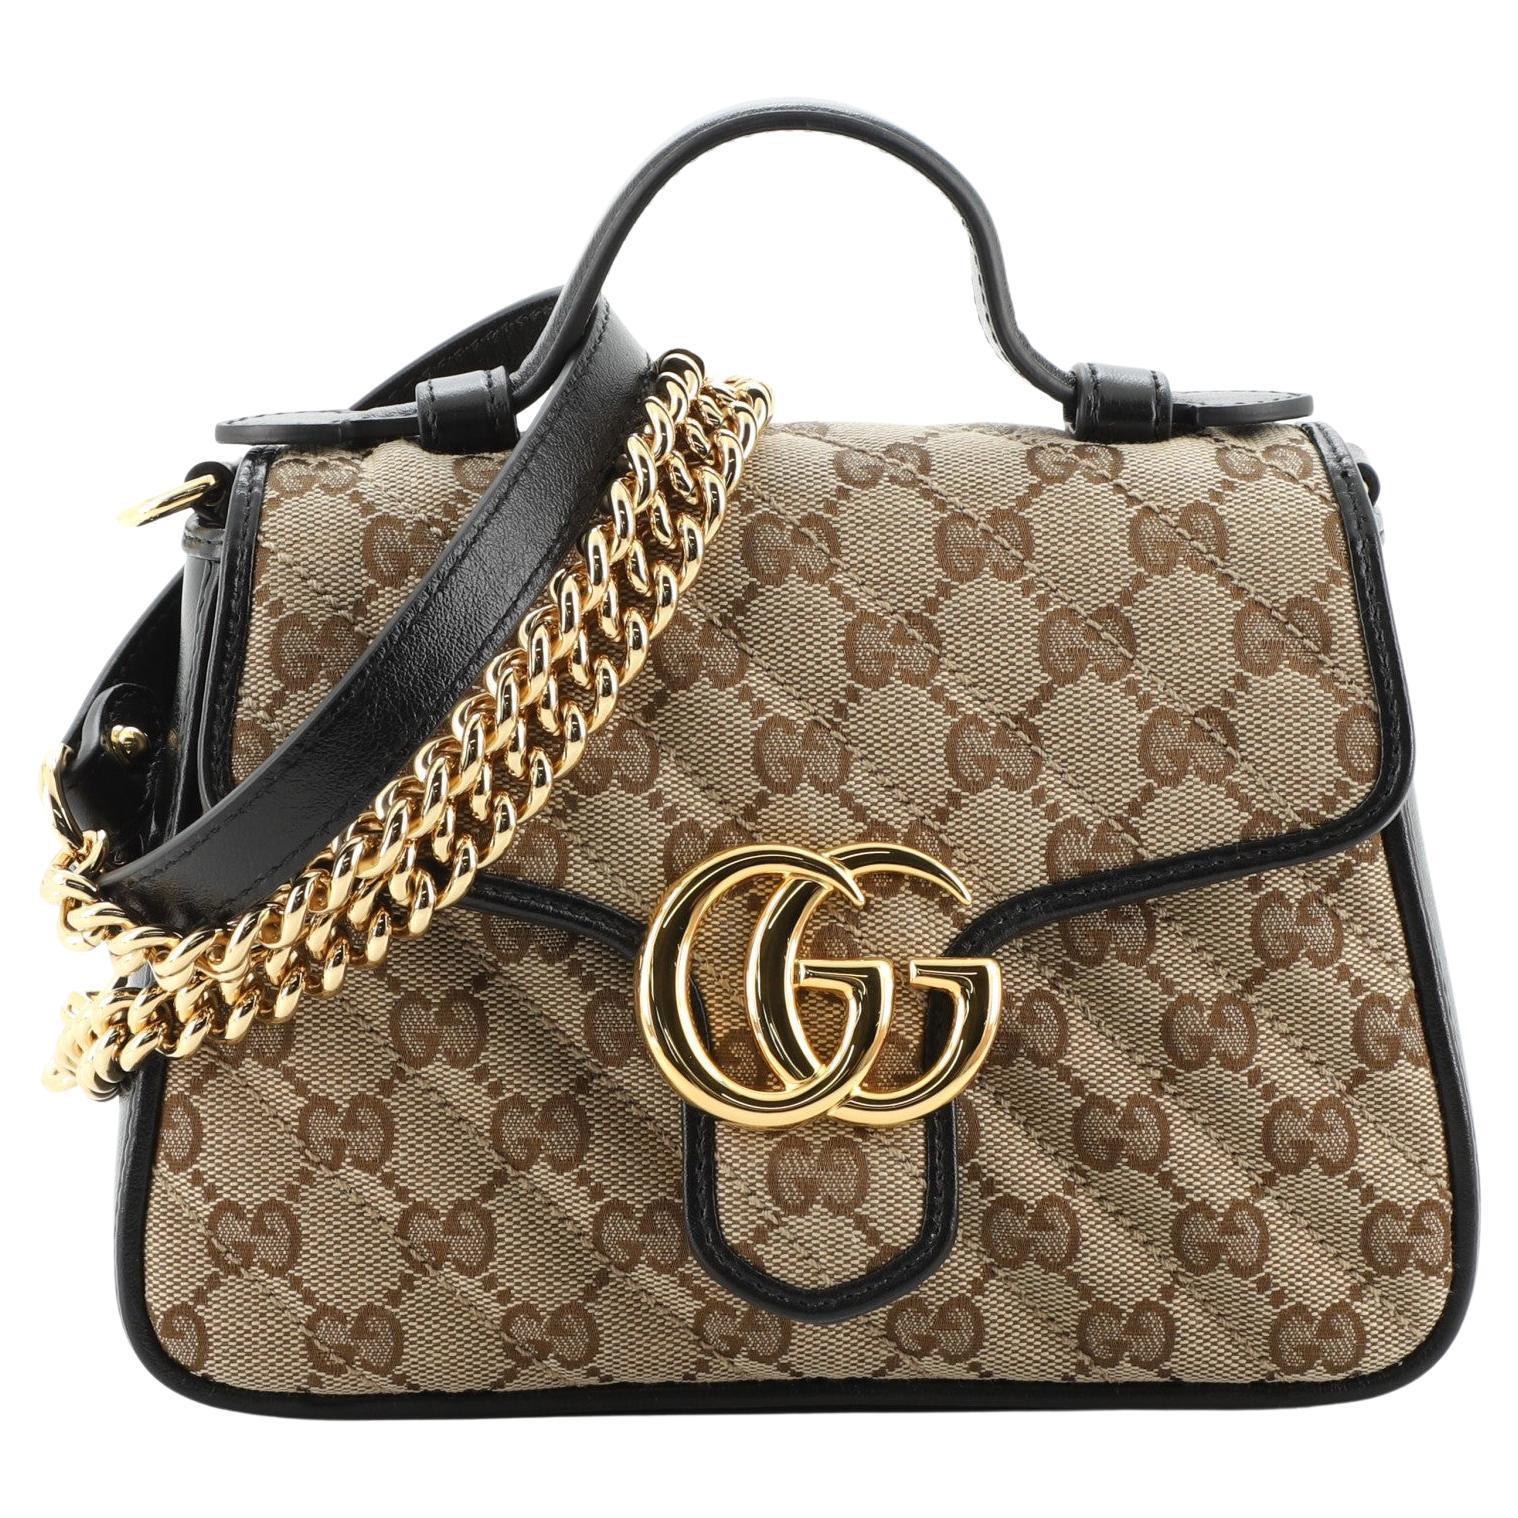 Gucci Black Diagonal Quilted GG Leather Marmont Bamboo Top Handle